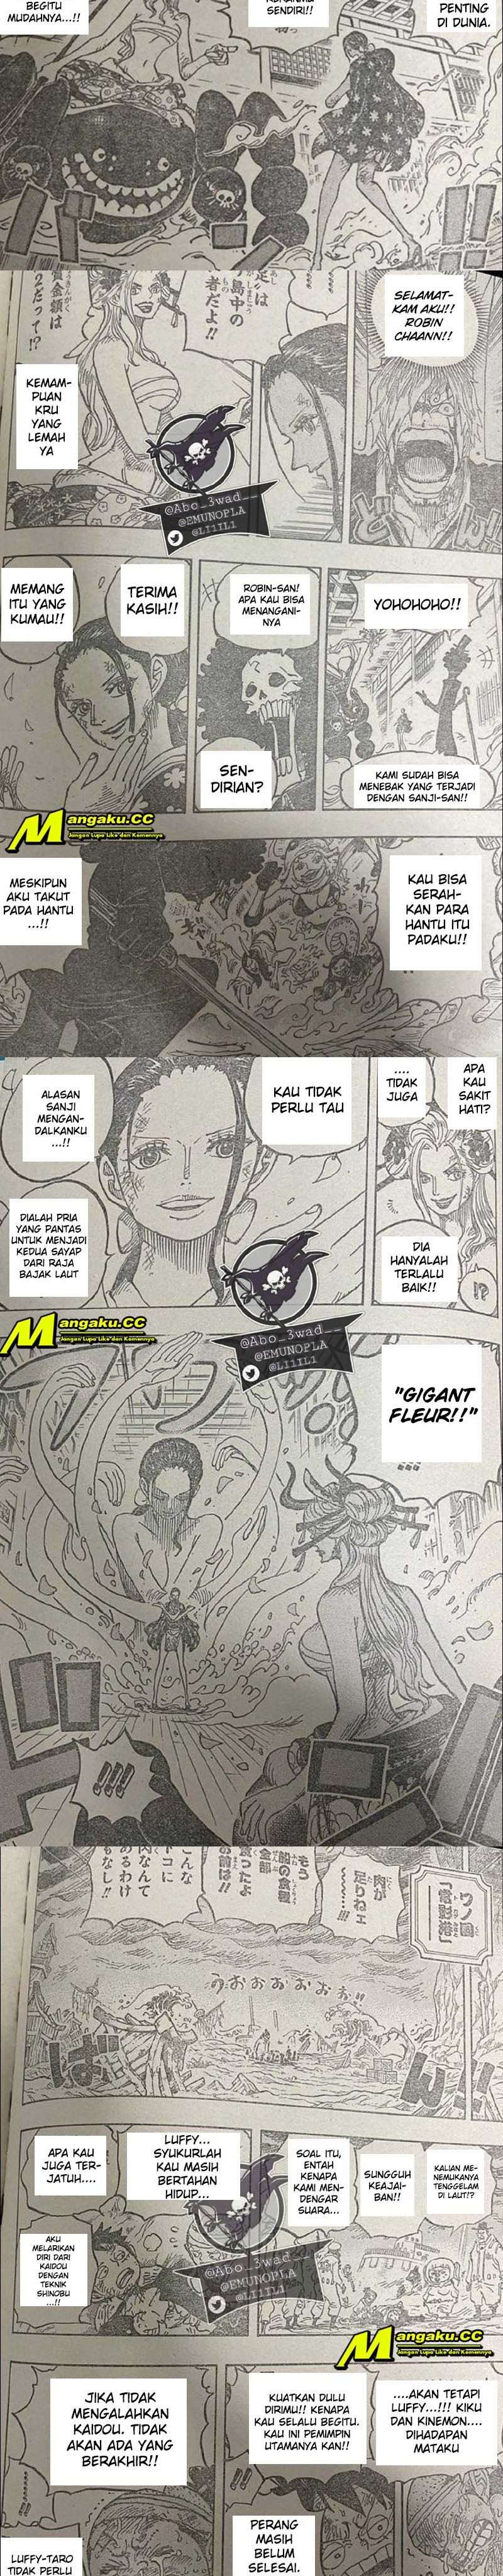 One Piece Chapter 1020 LQ Image 4